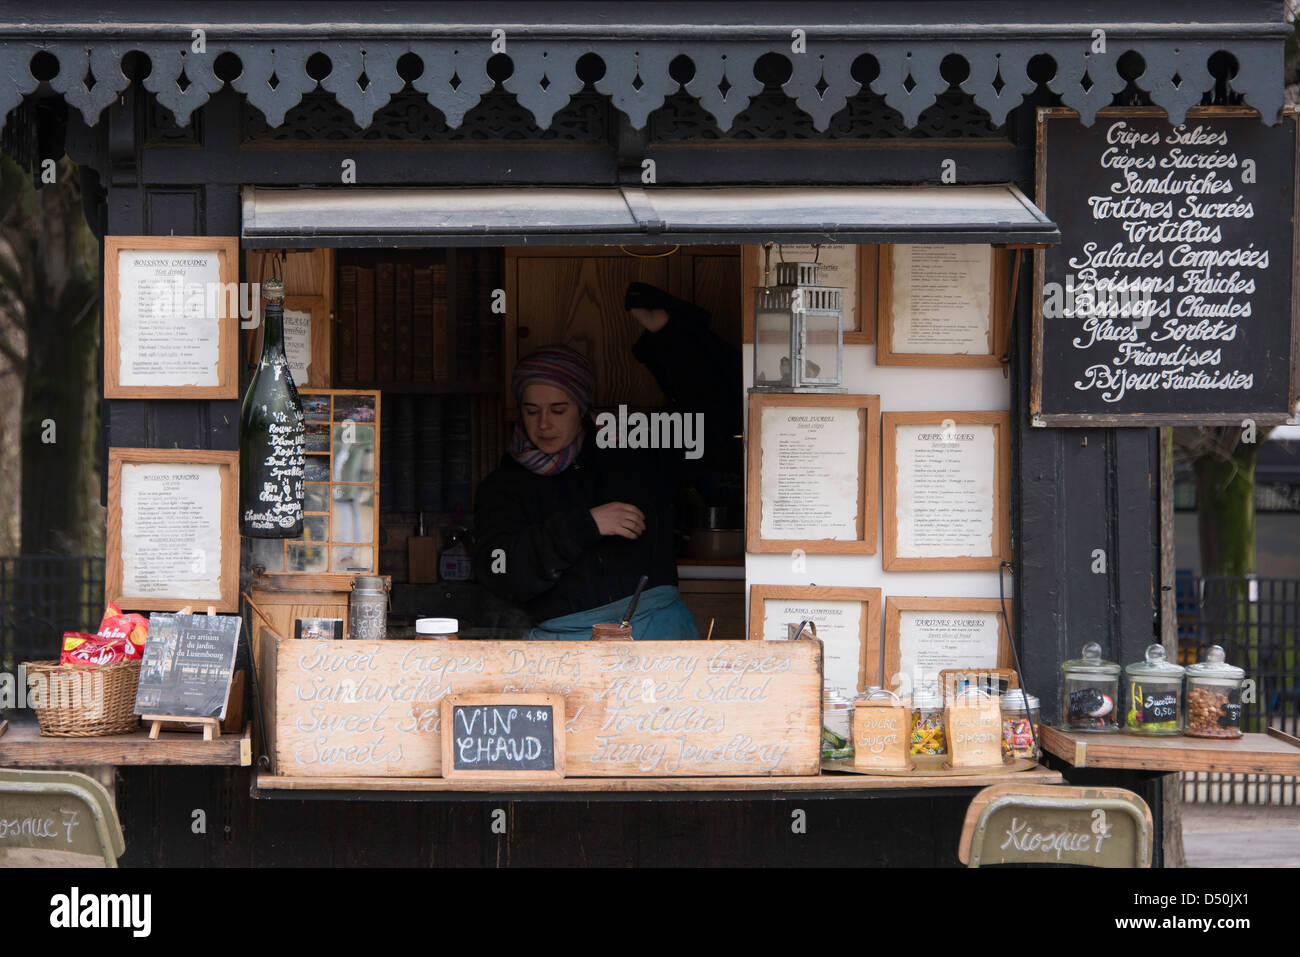 Cafe selling warm wine and food in the Jardin du Luxembourg in Paris, France Stock Photo